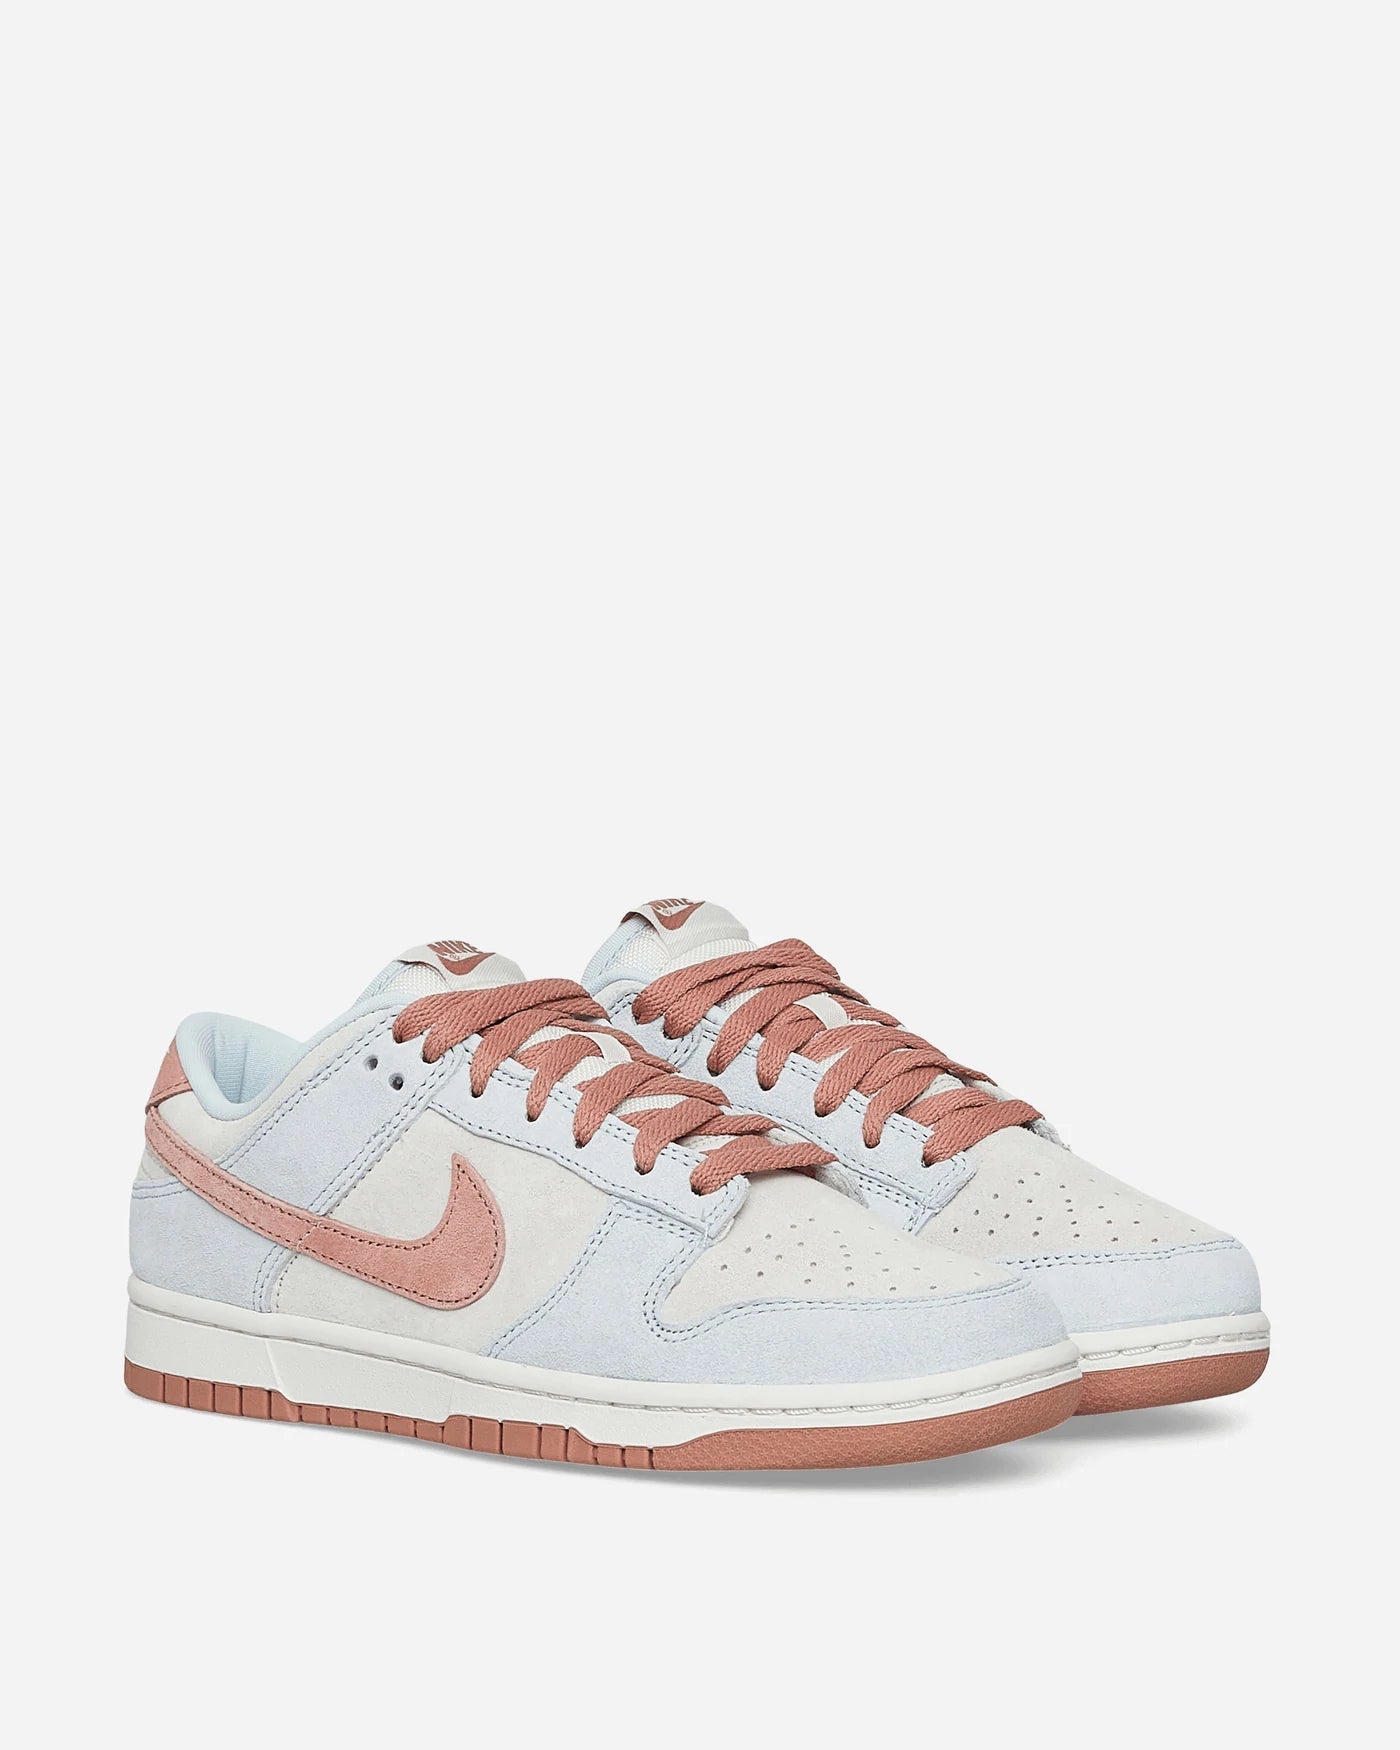 NIKE DUNK LOW FOSSIL ROSE DH7577-001 sneakmarks